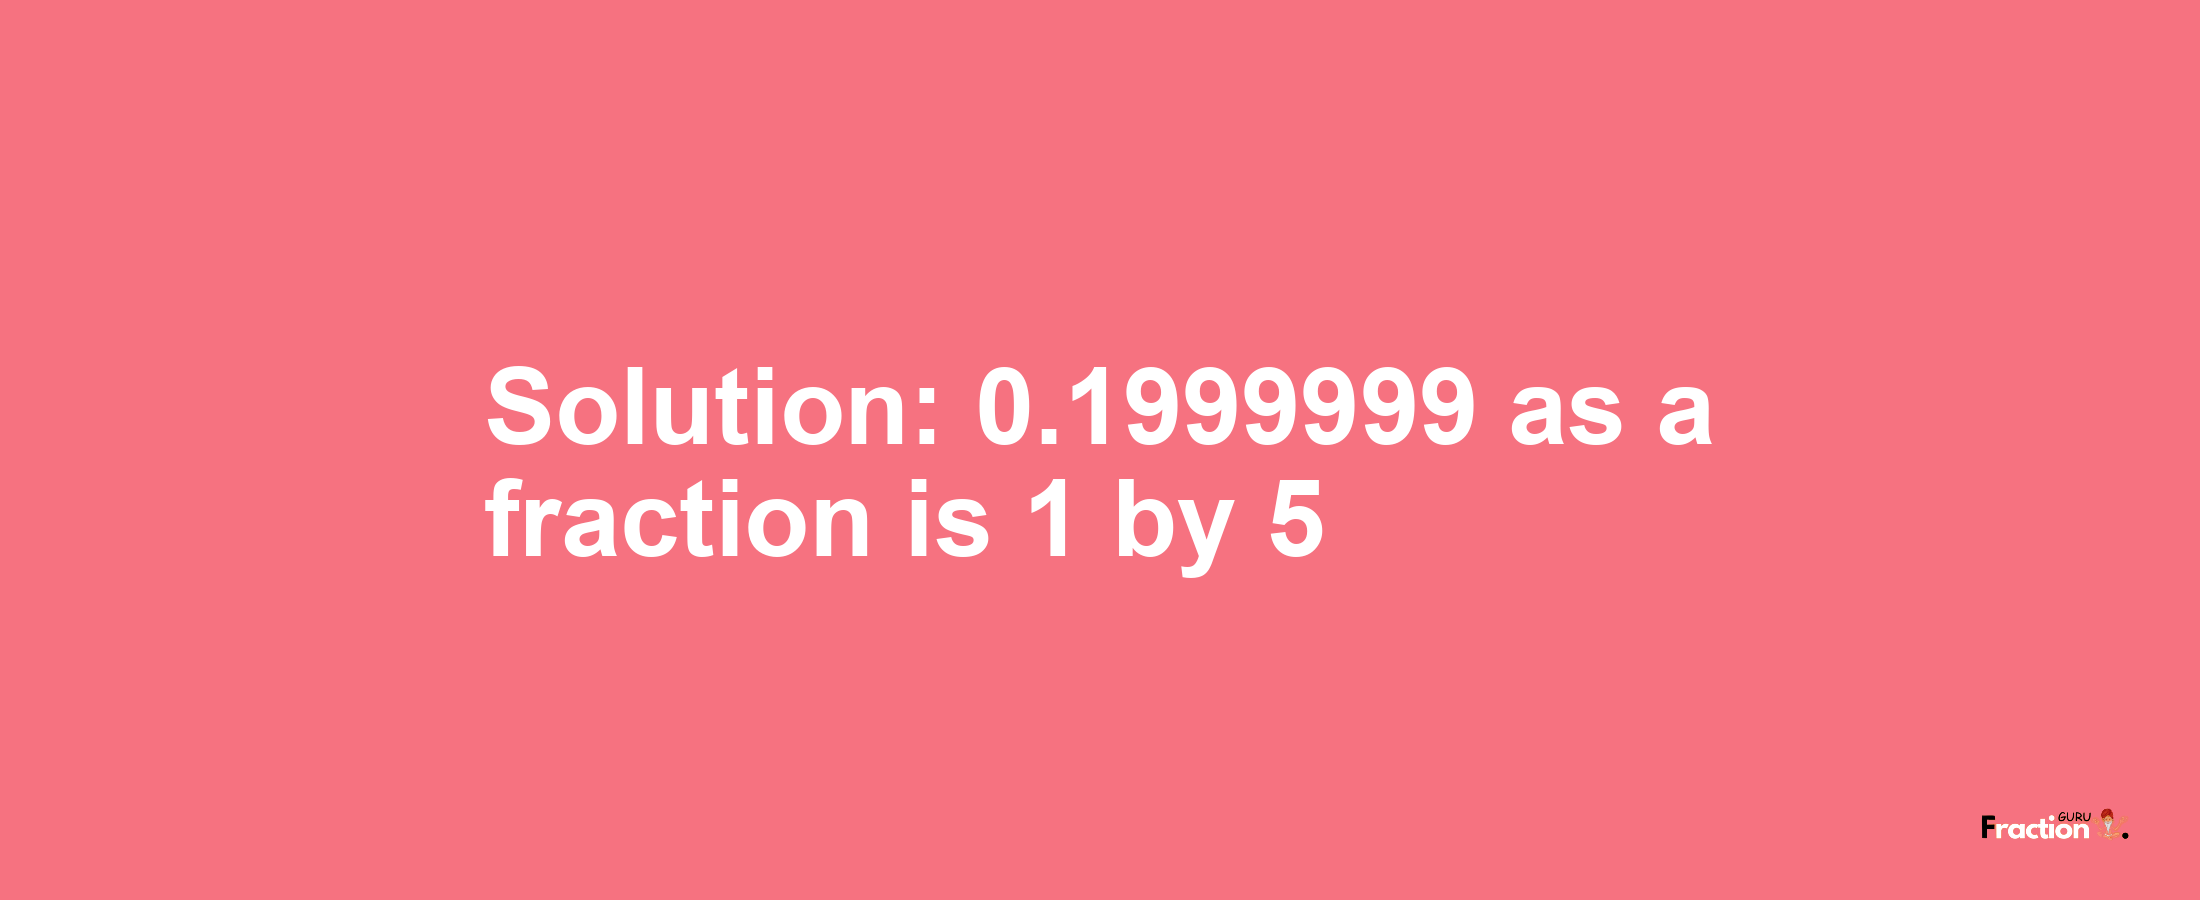 Solution:0.1999999 as a fraction is 1/5